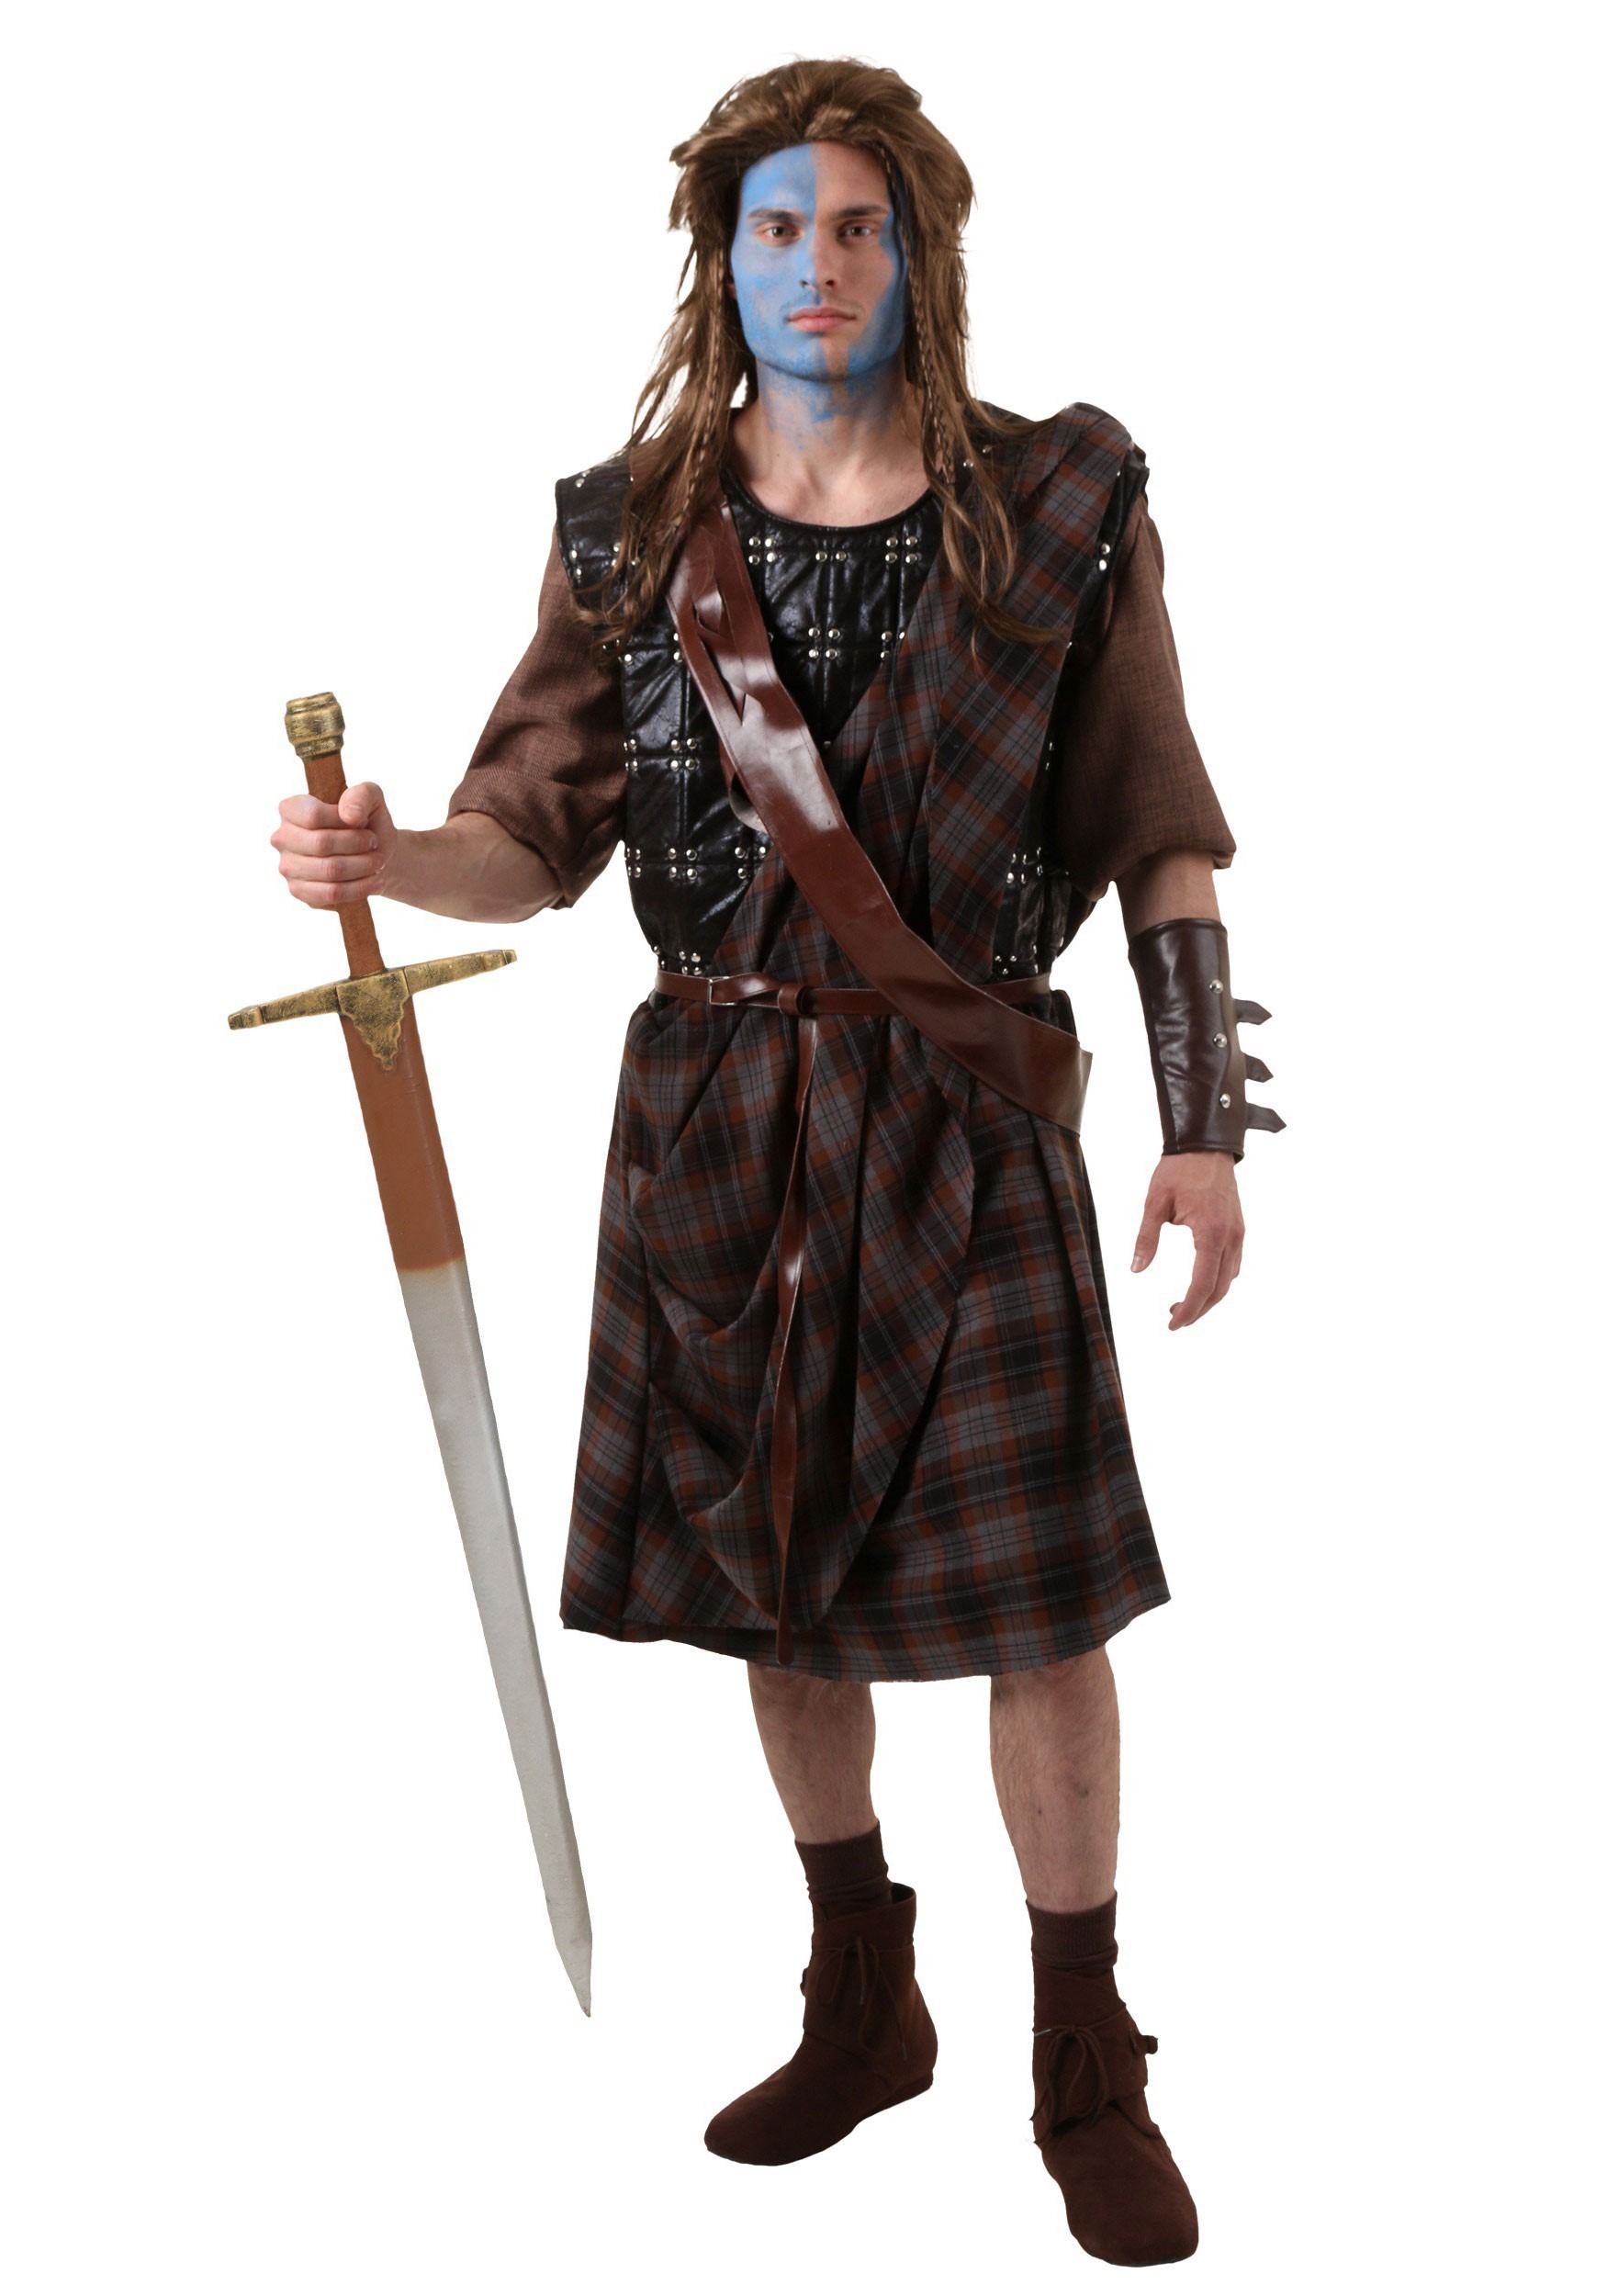 Image of Adult Braveheart William Wallace Costume | Movie Character Costumes ID BVH6016AD-XL